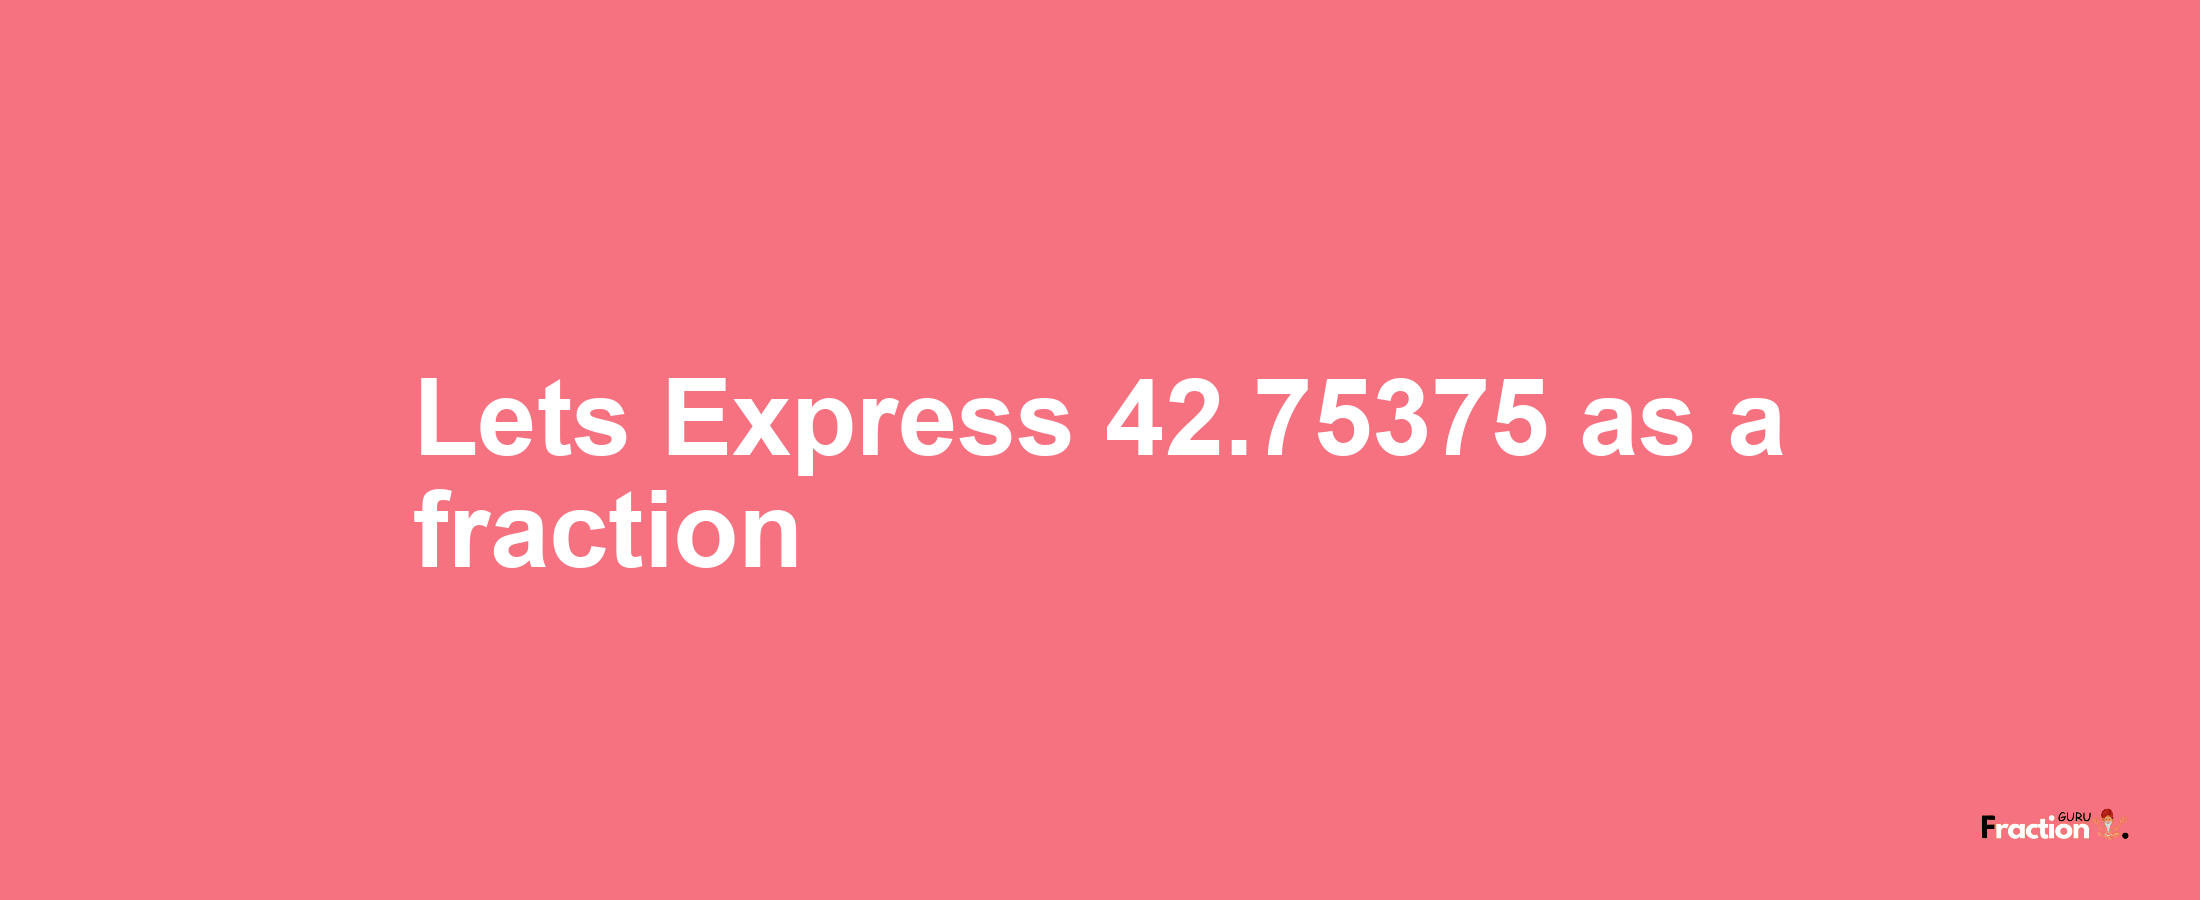 Lets Express 42.75375 as afraction